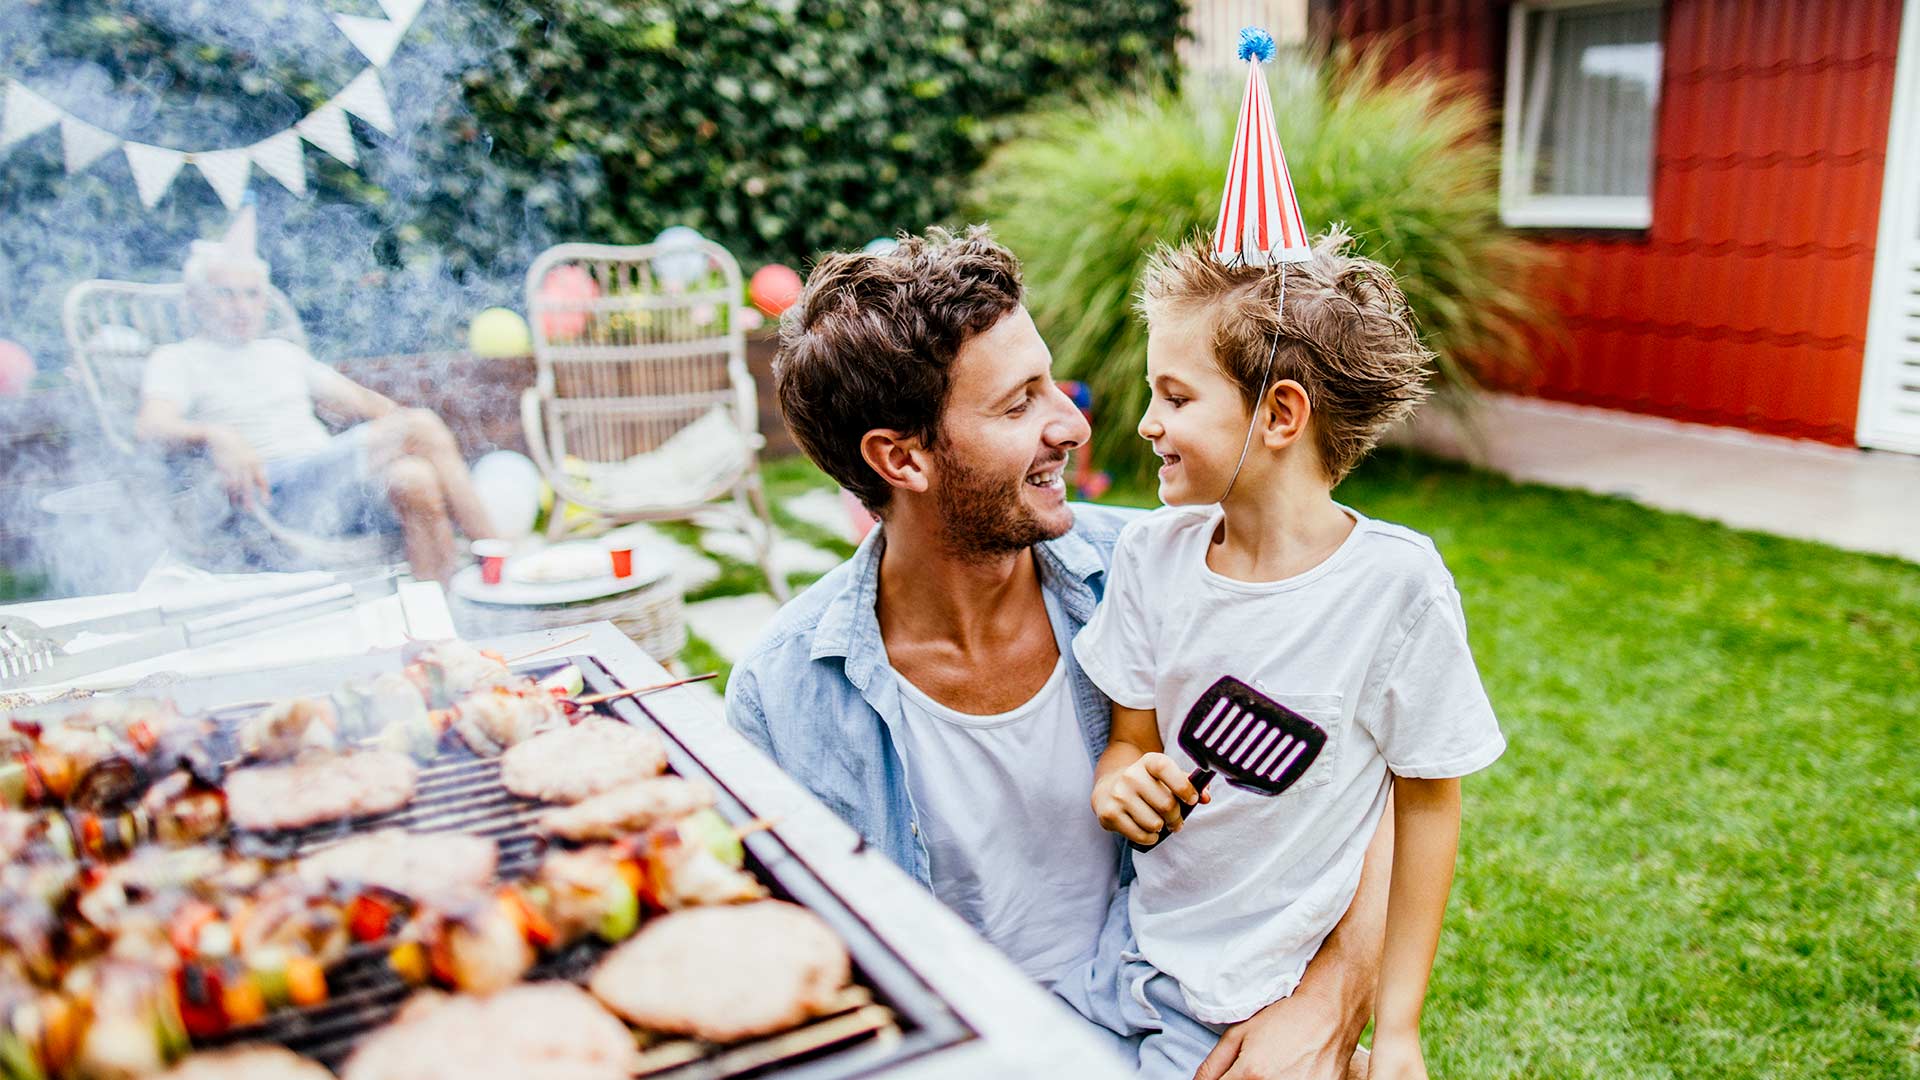 Healthy Summer Grilling Ideas Kids Will Love